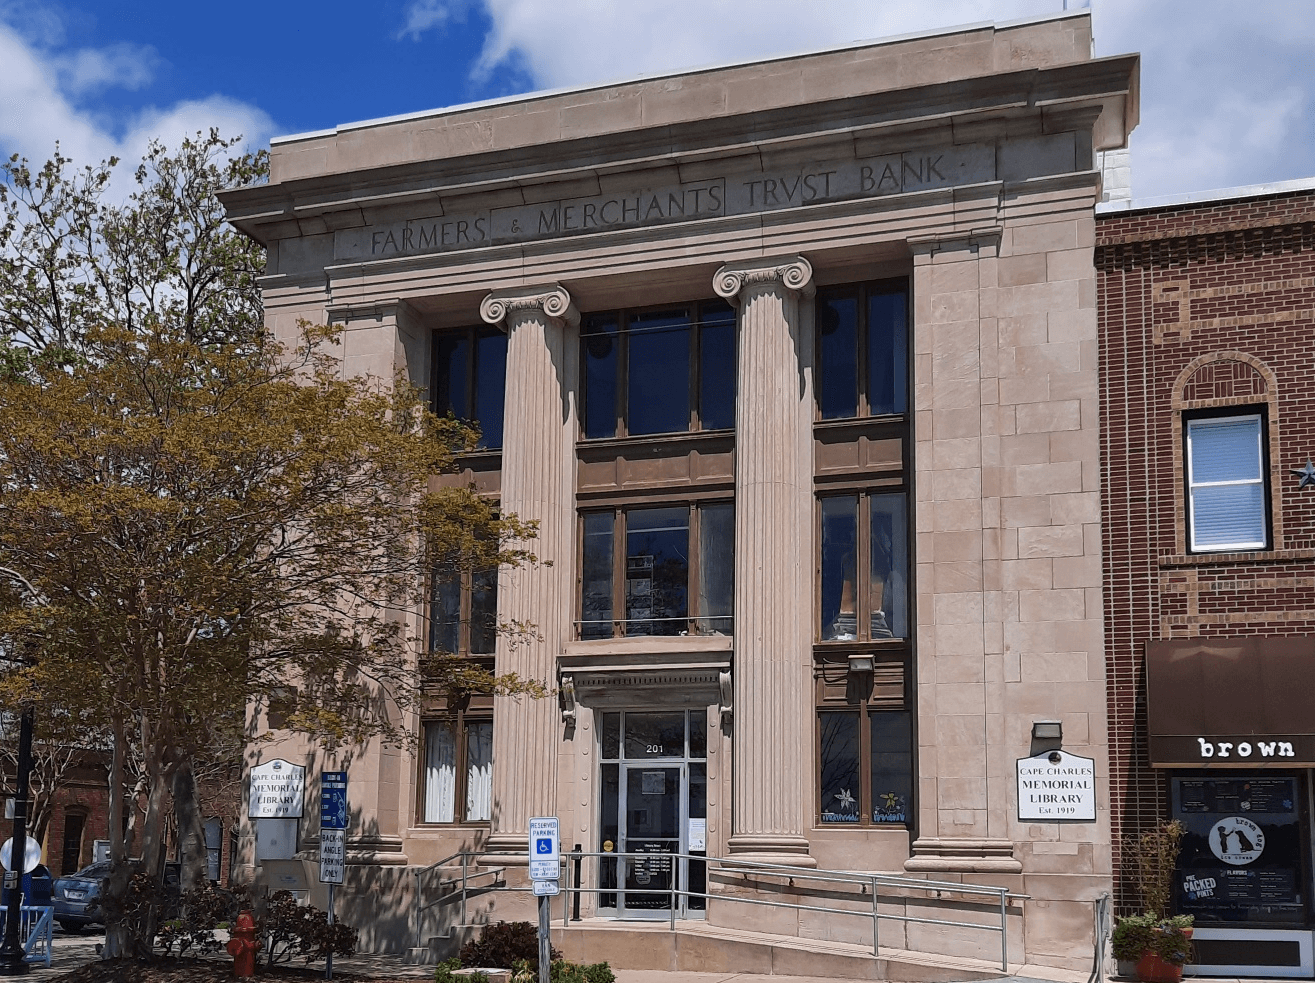 Cape Charles Memorial Library